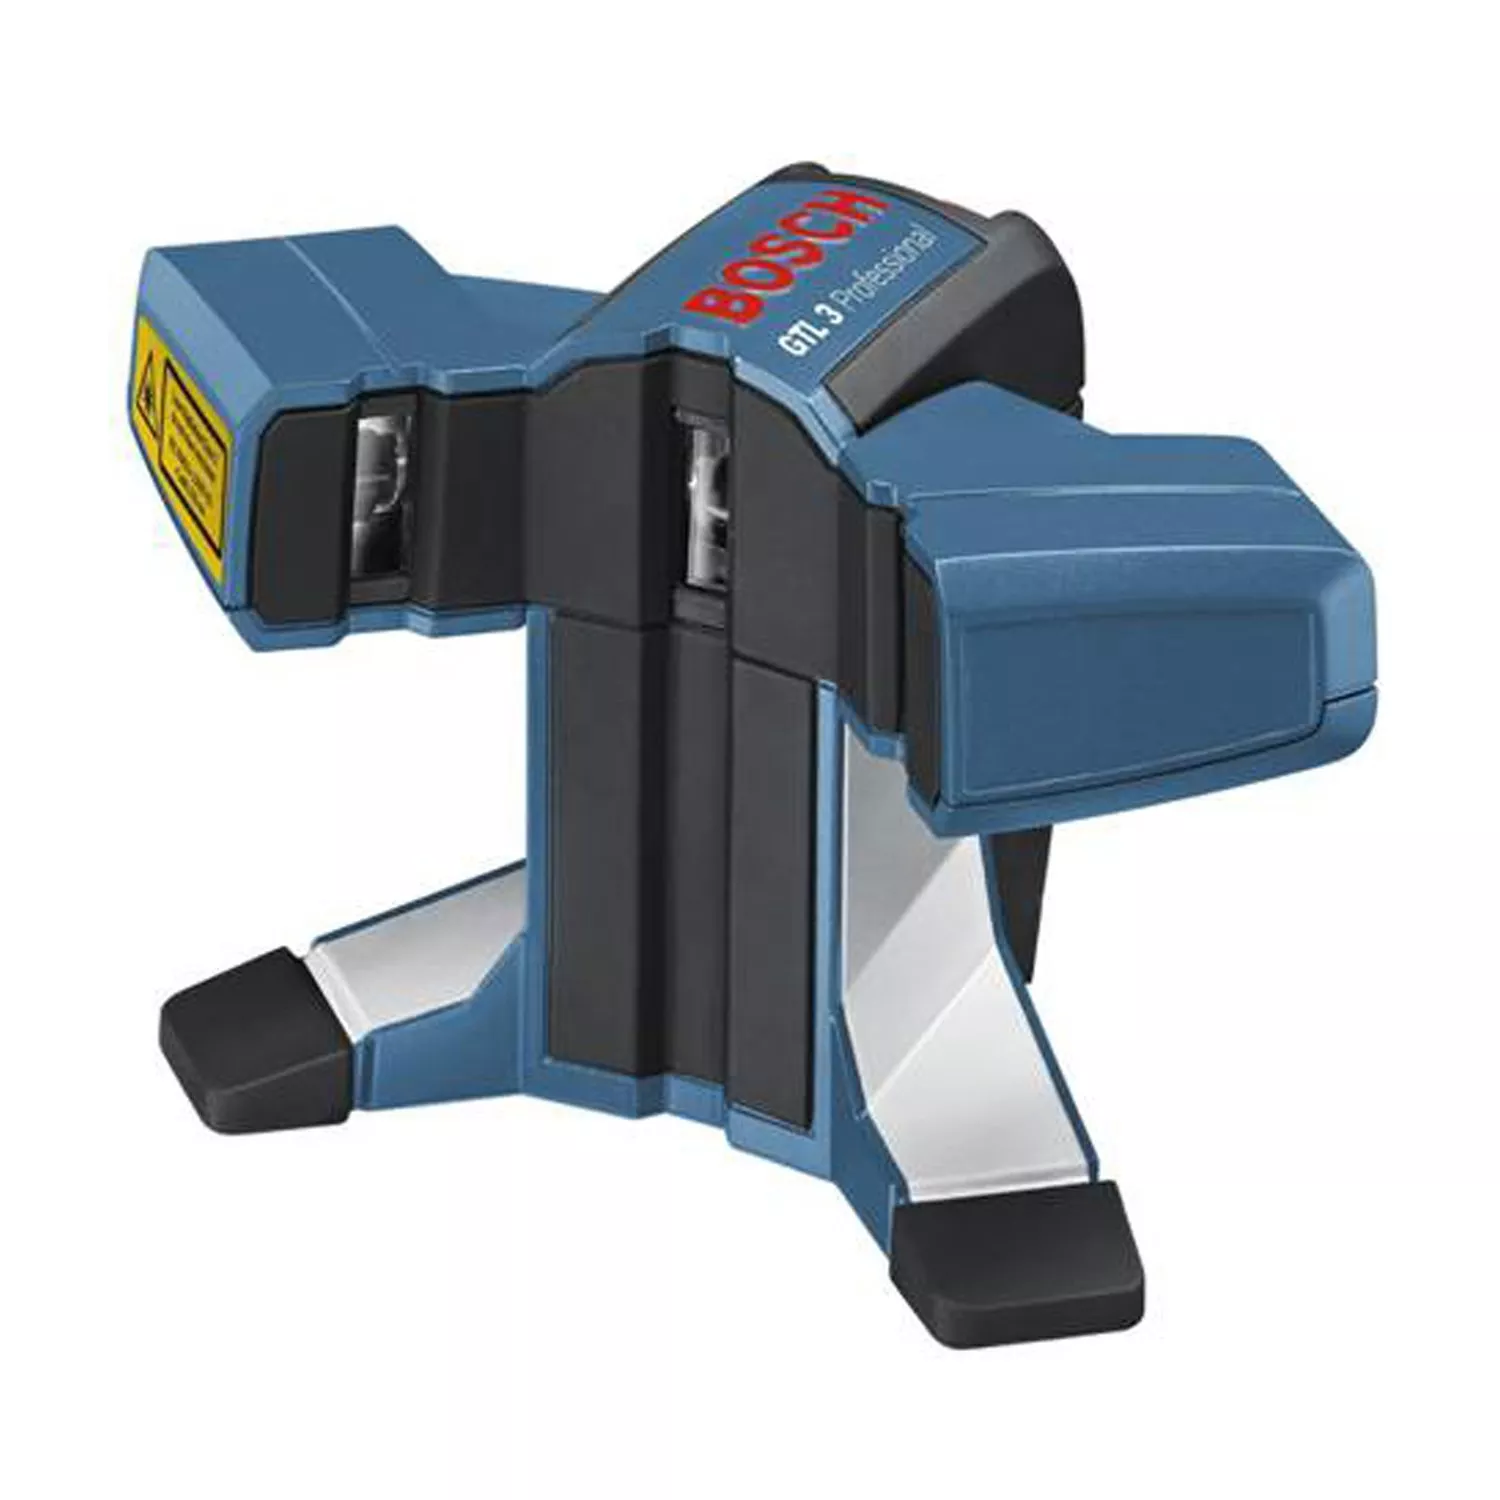 Bosch Wall and Floor Tile Laser